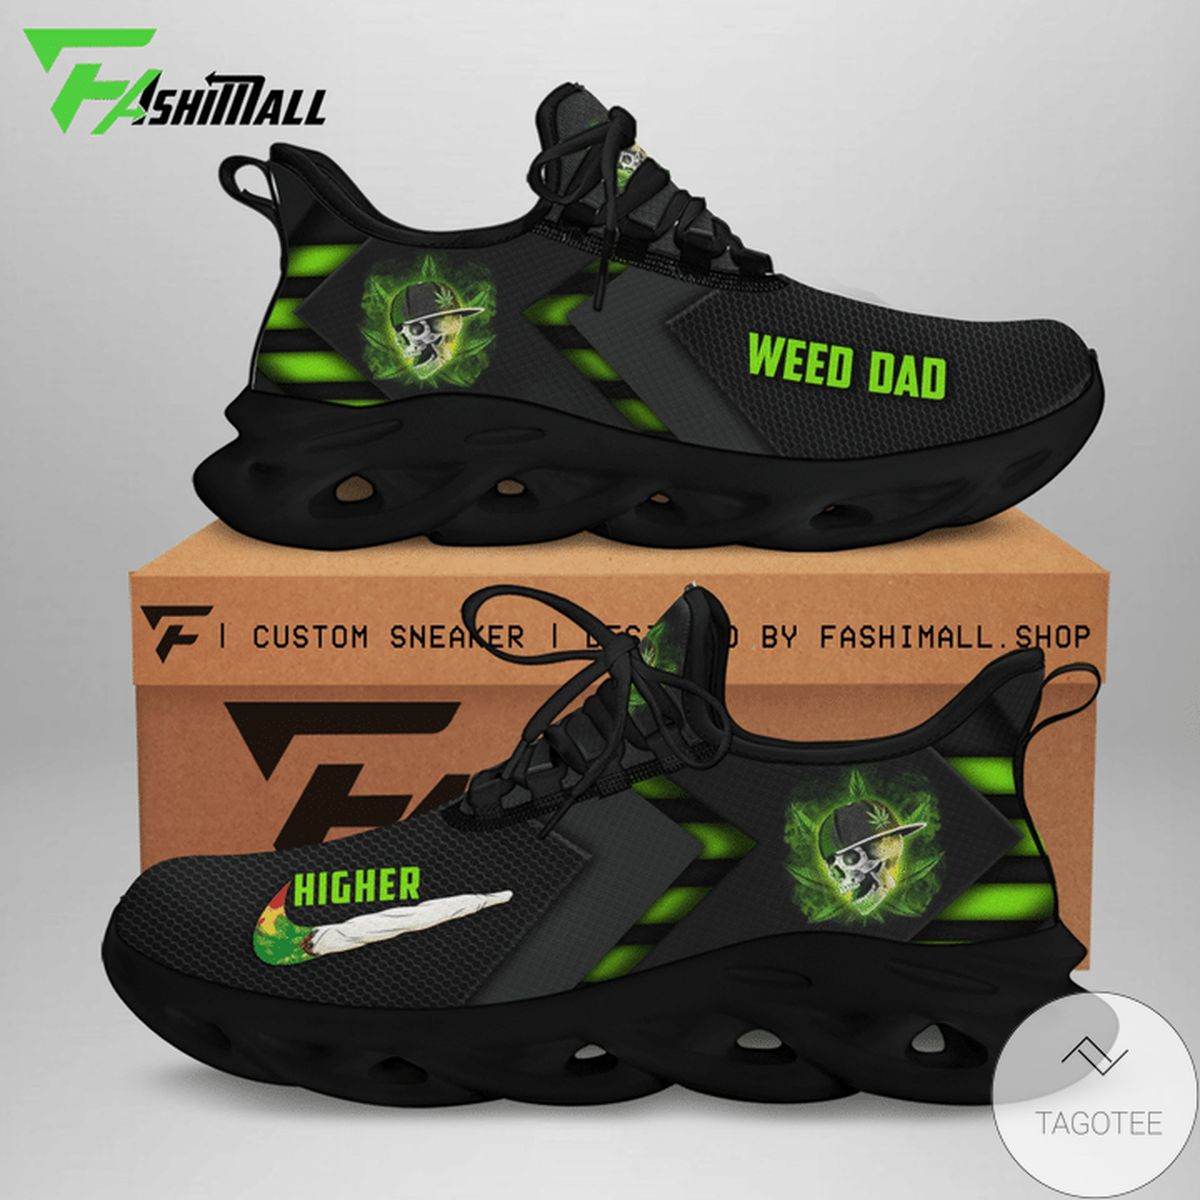 We Dad Cannabist Skull Max Soul Shoes